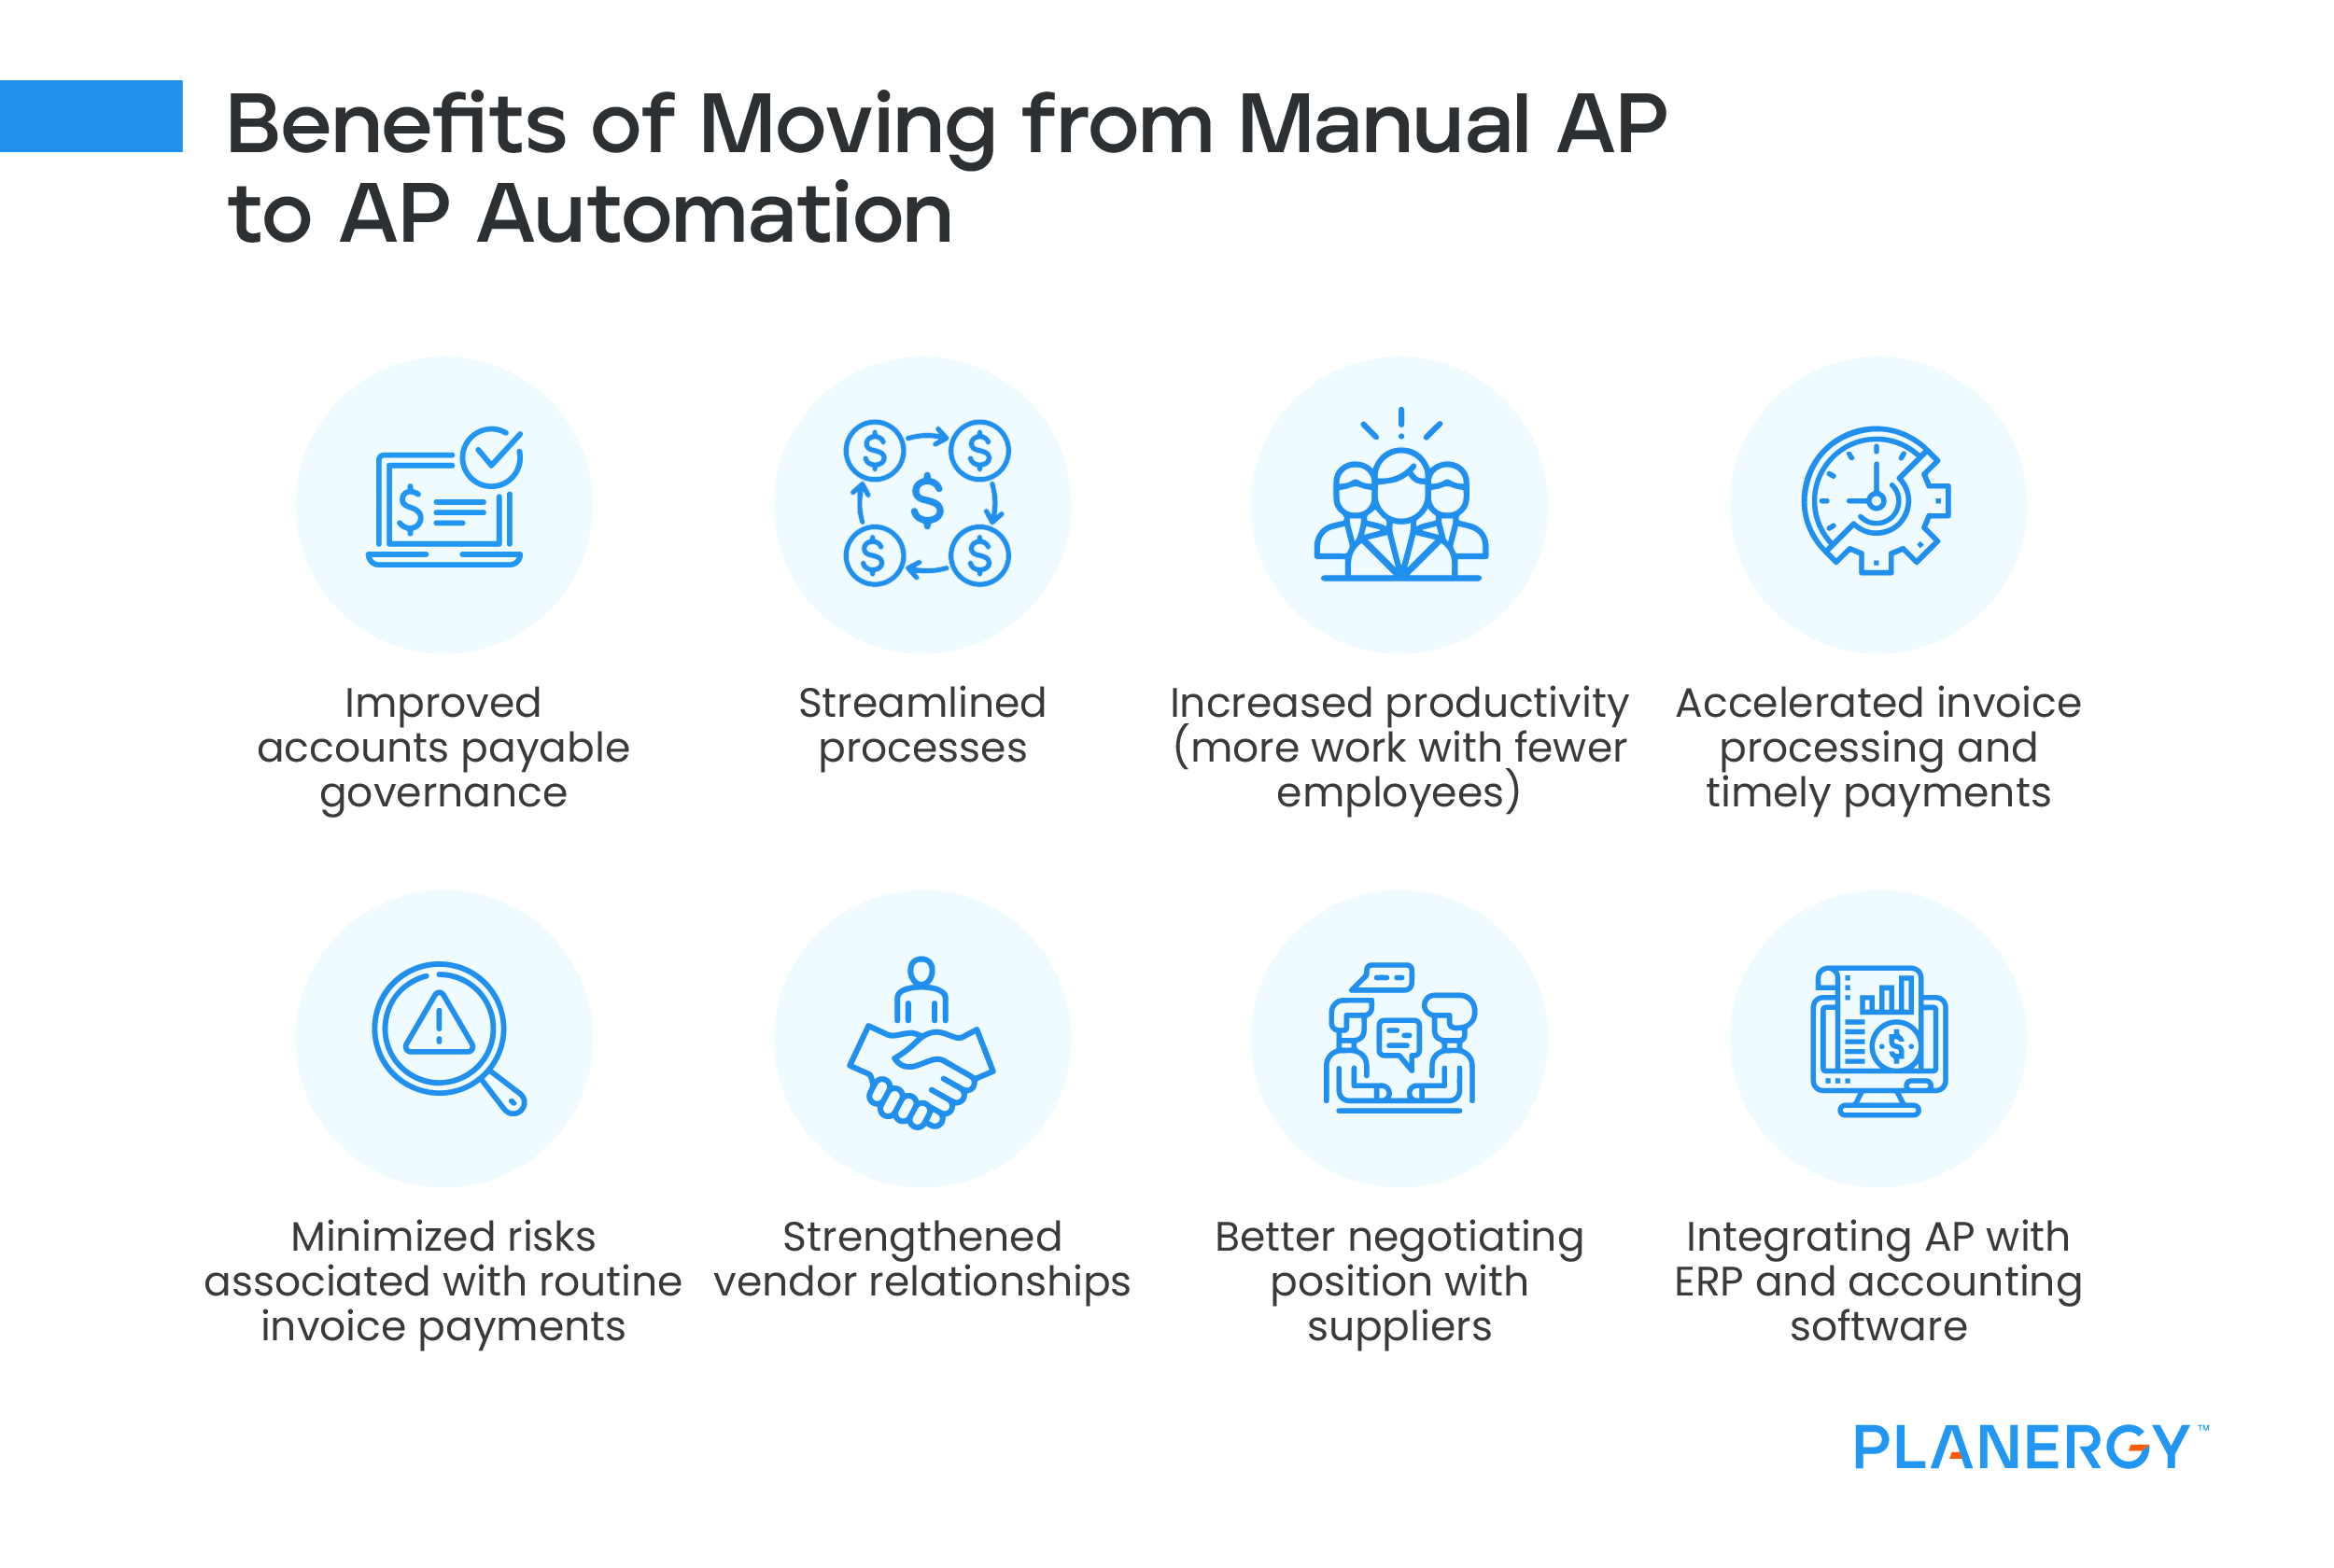 Benefits of Moving From Manual AP to AP Automation